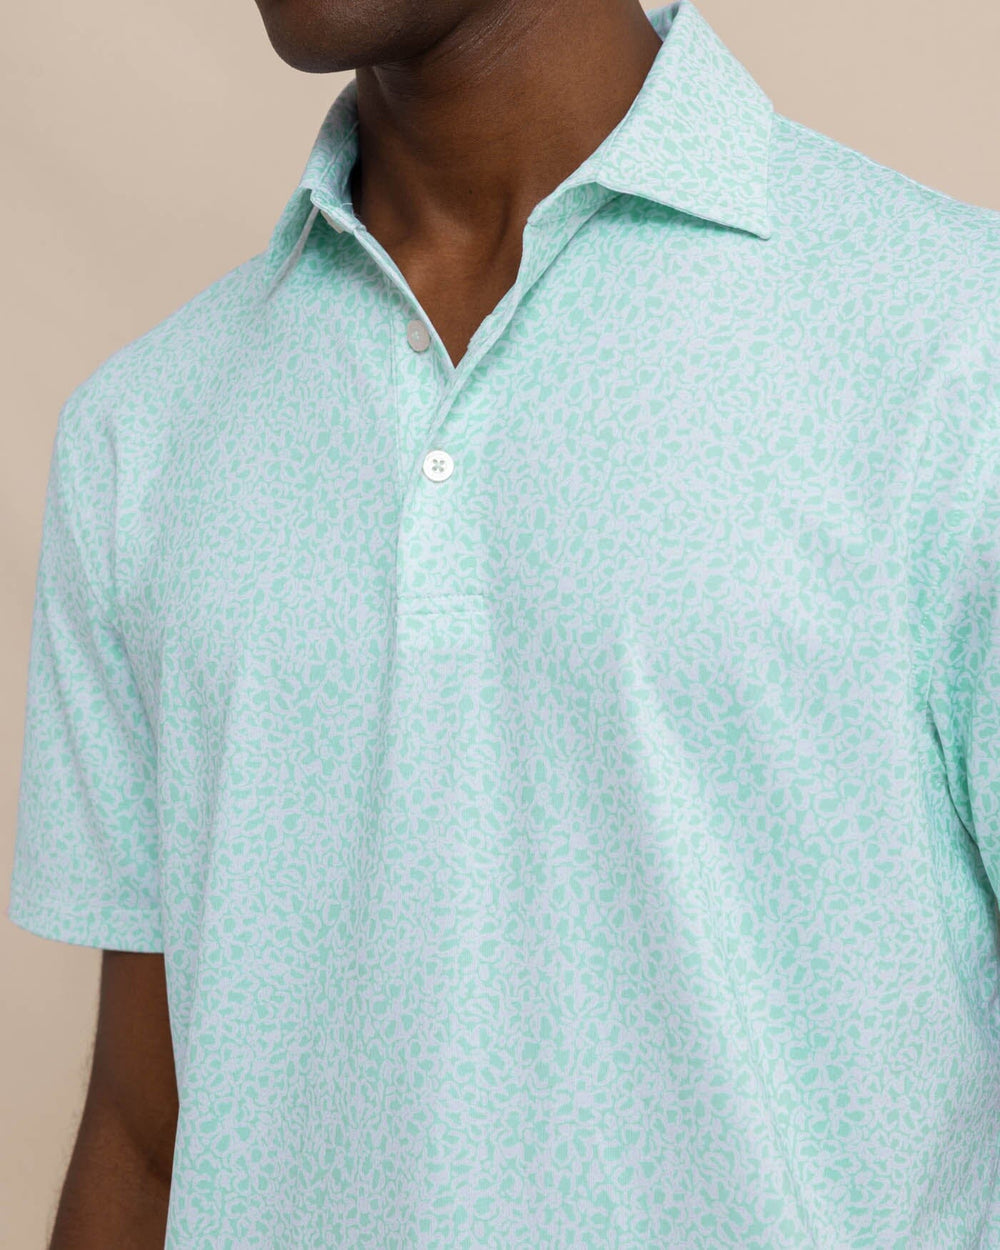 The detail view of the Southern Tide Driver That Floral Feeling Printed Polo by Southern Tide - Wake Blue